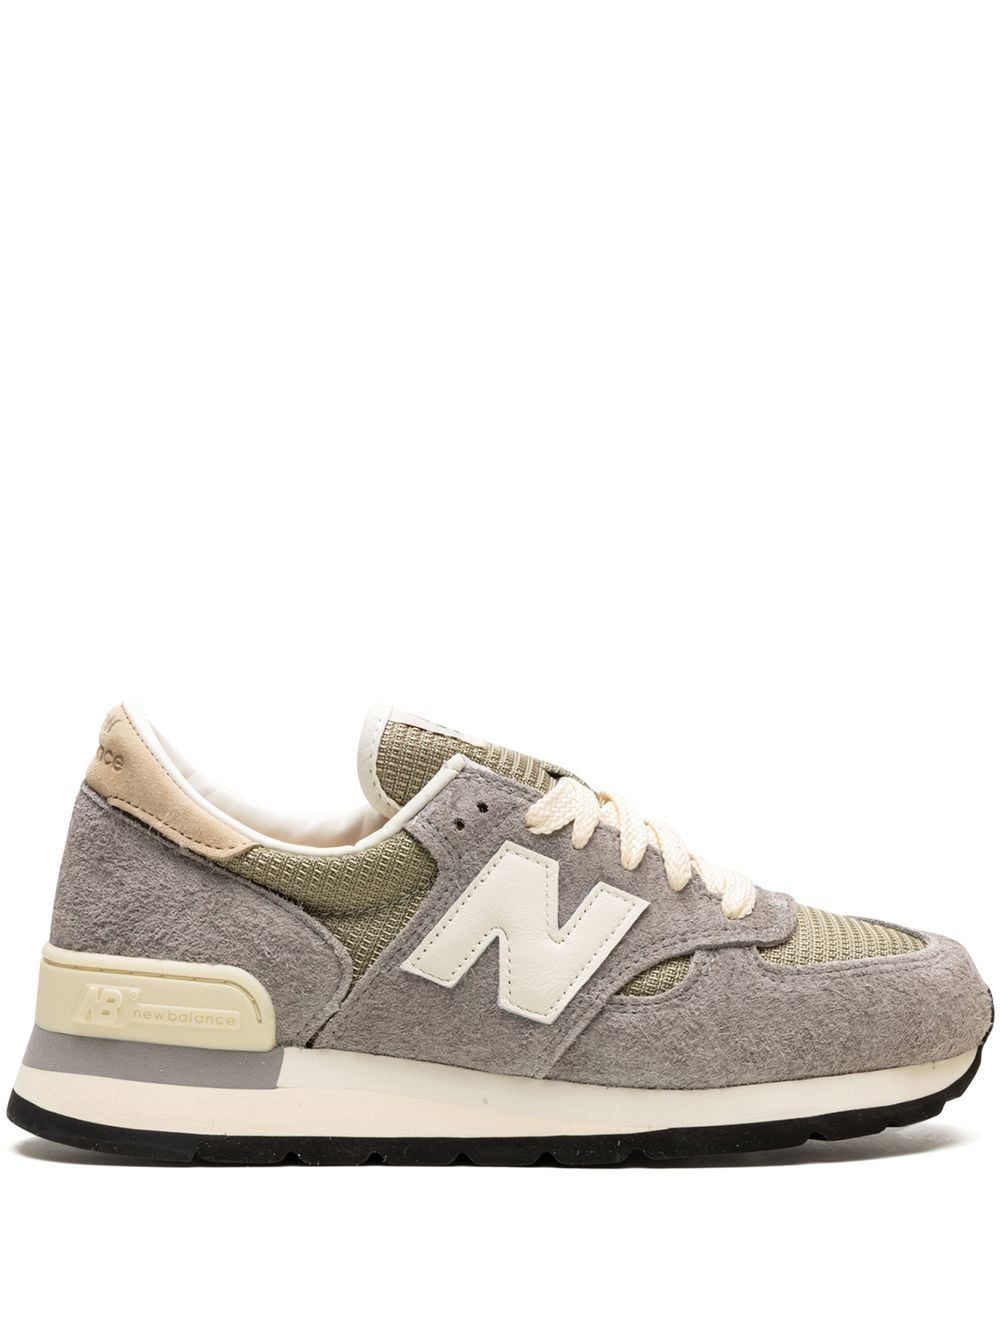 New Balance MADE in USA 990v1 sneakers - Neutrals